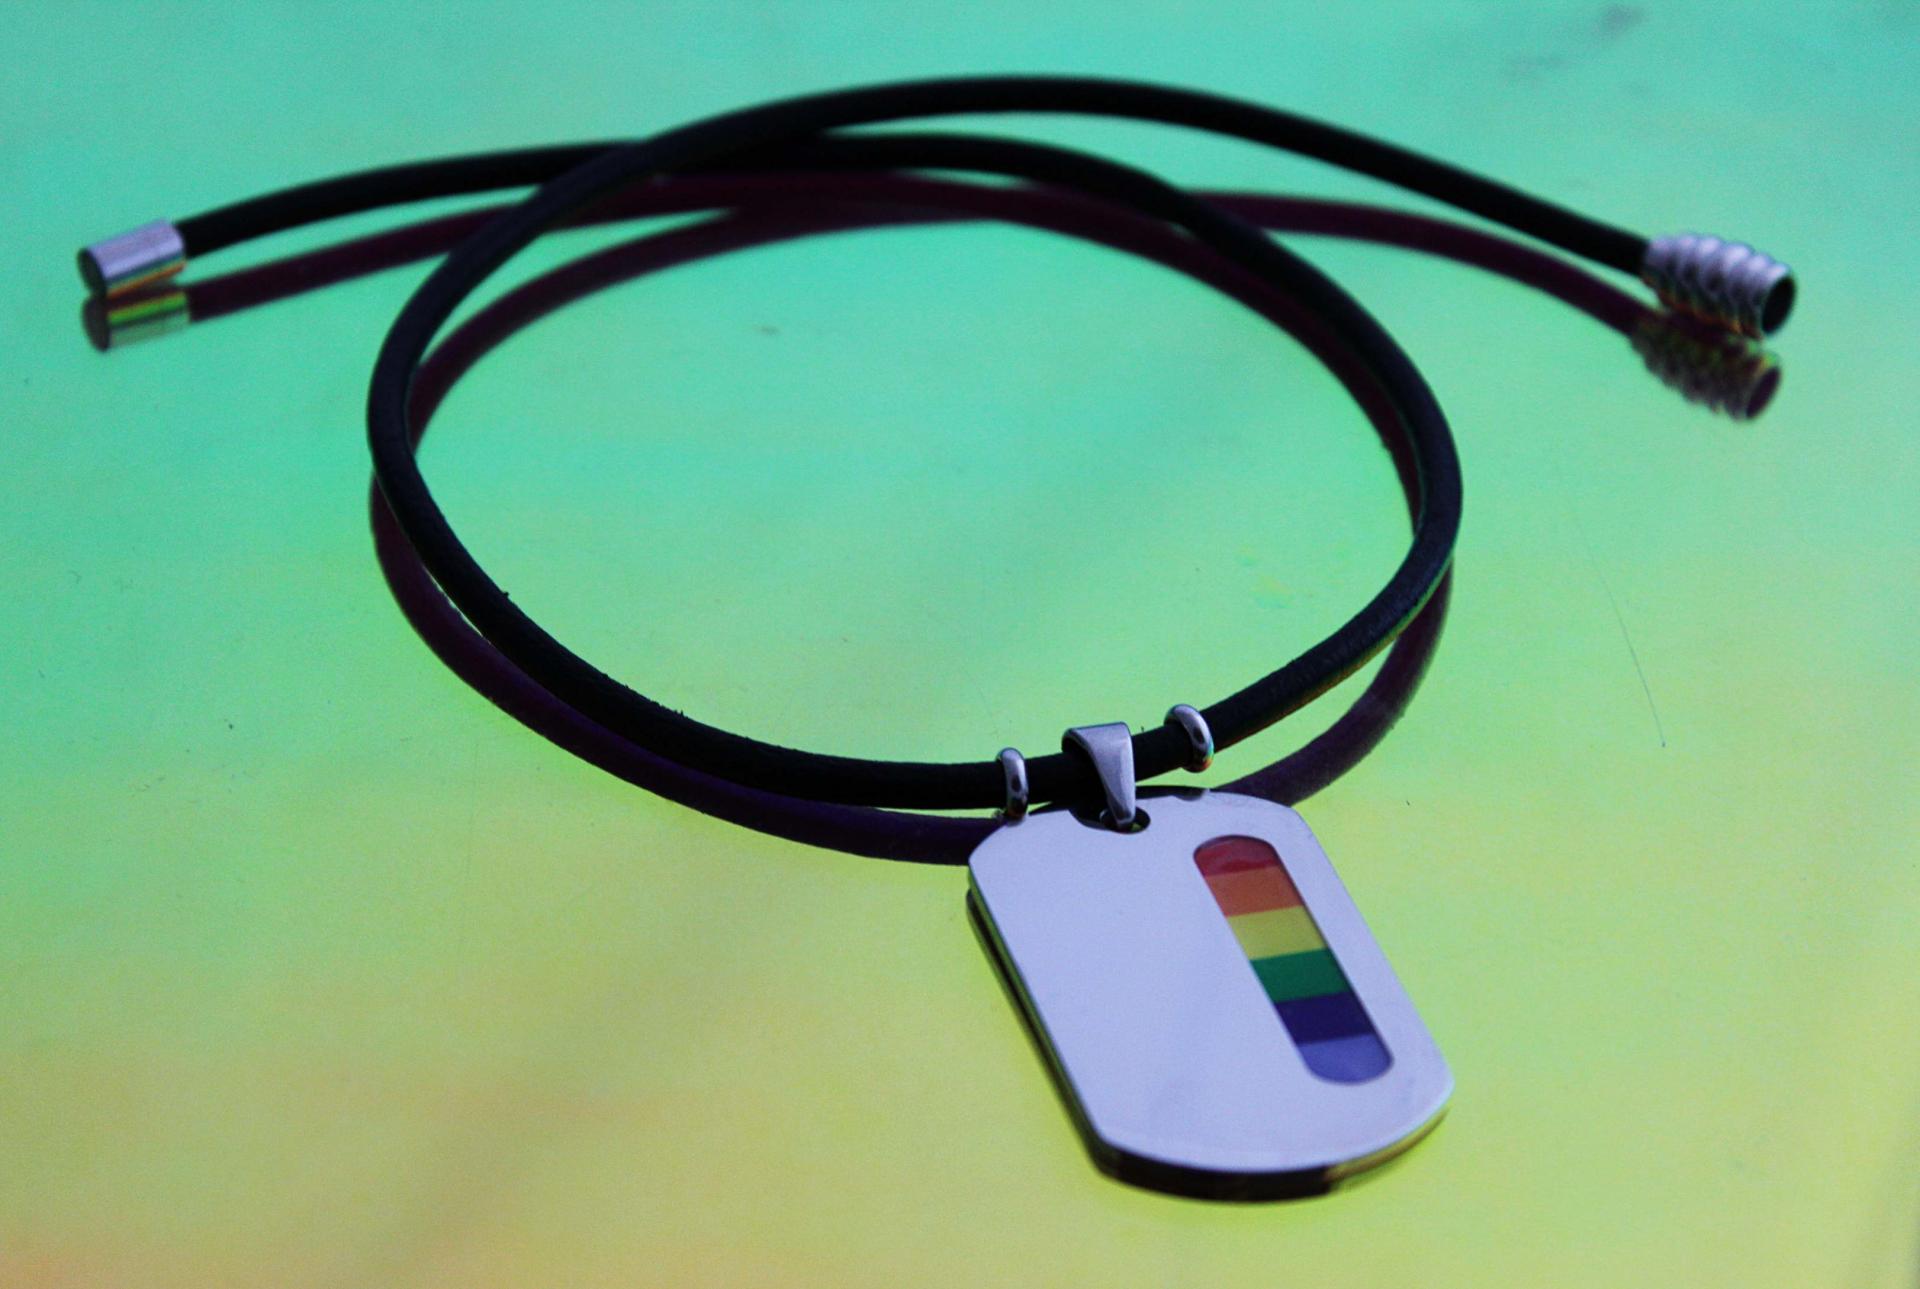 Rainbow Tag Stainless Steel & Leather Choker